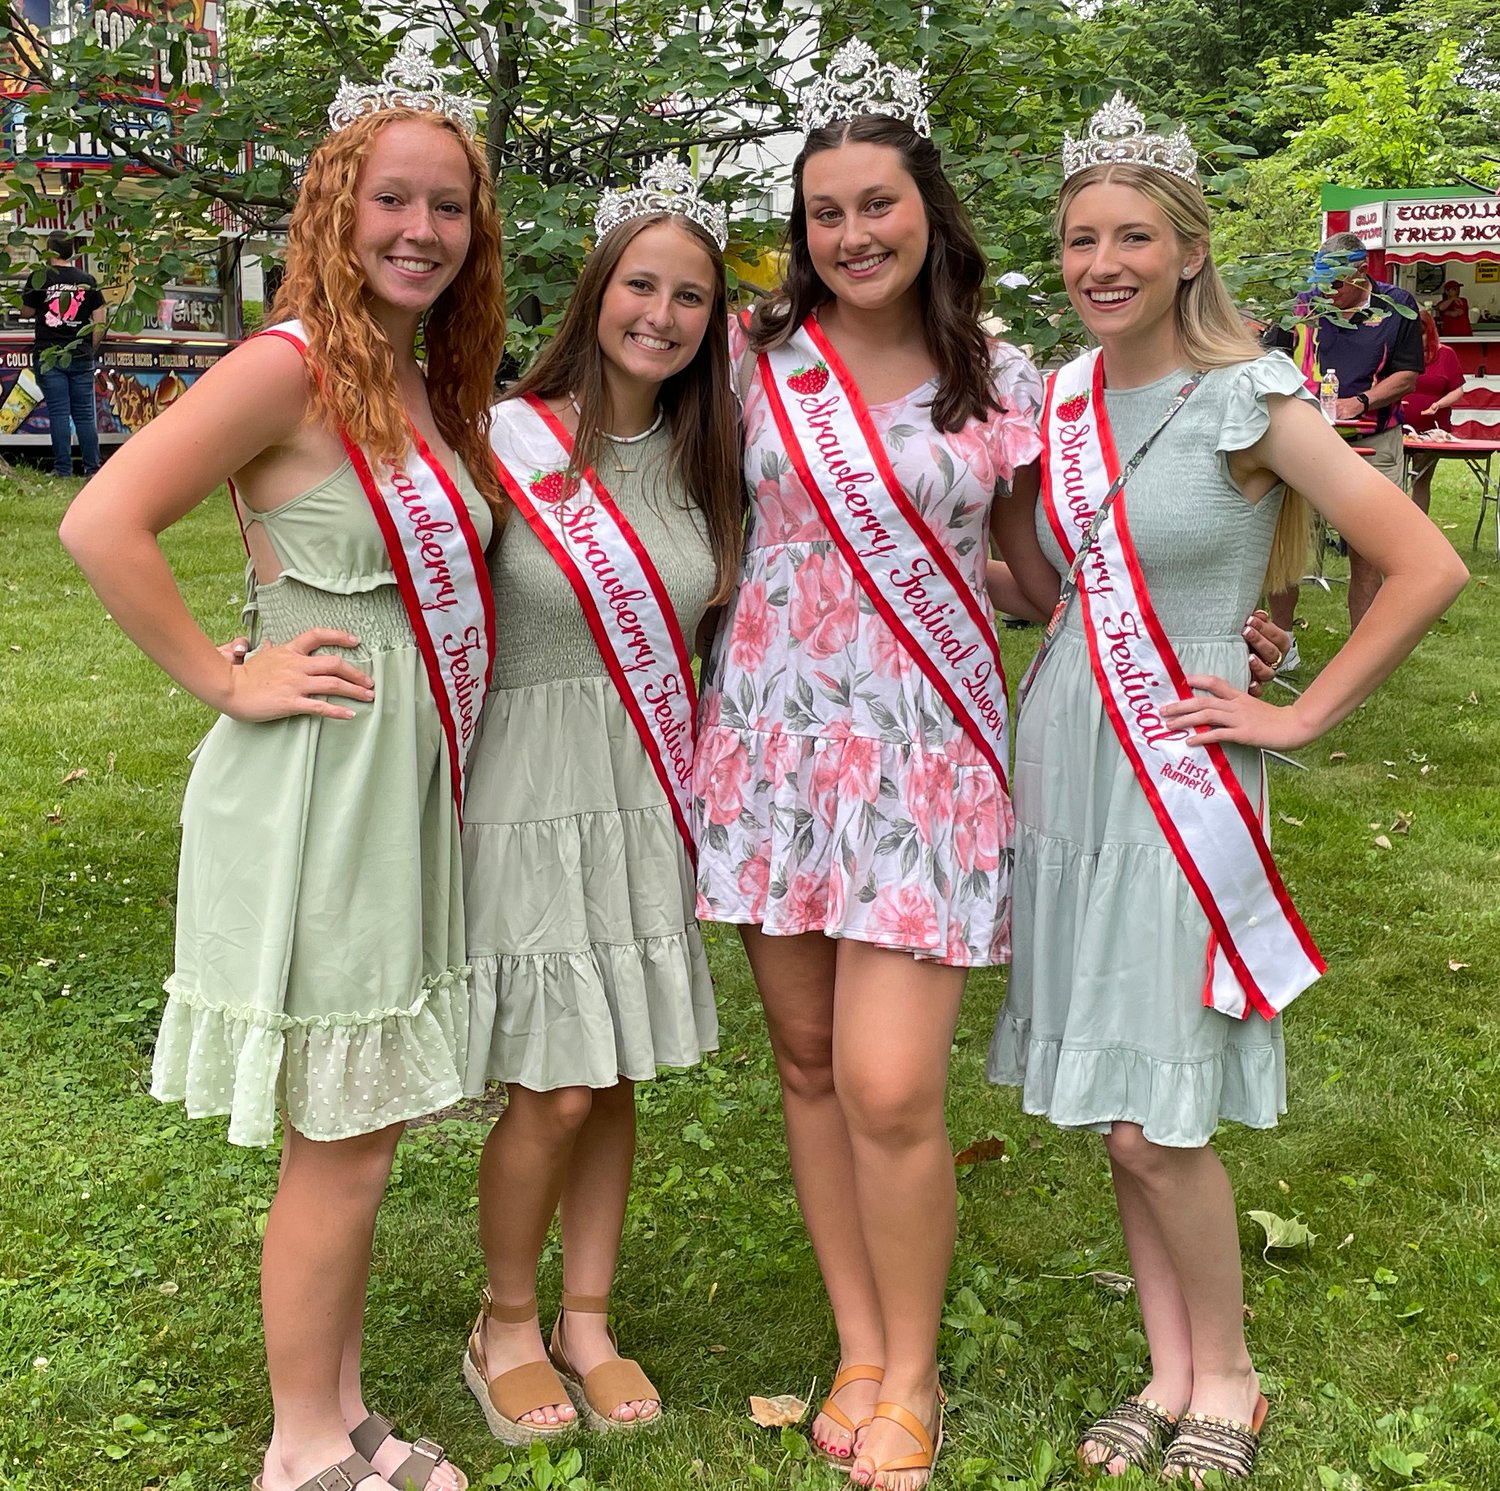 Strawberry Festival Queen Rylie Koopman, second from right, poses with her court, Addison Meadows, Peri McClaskey and Bracy Slavens.